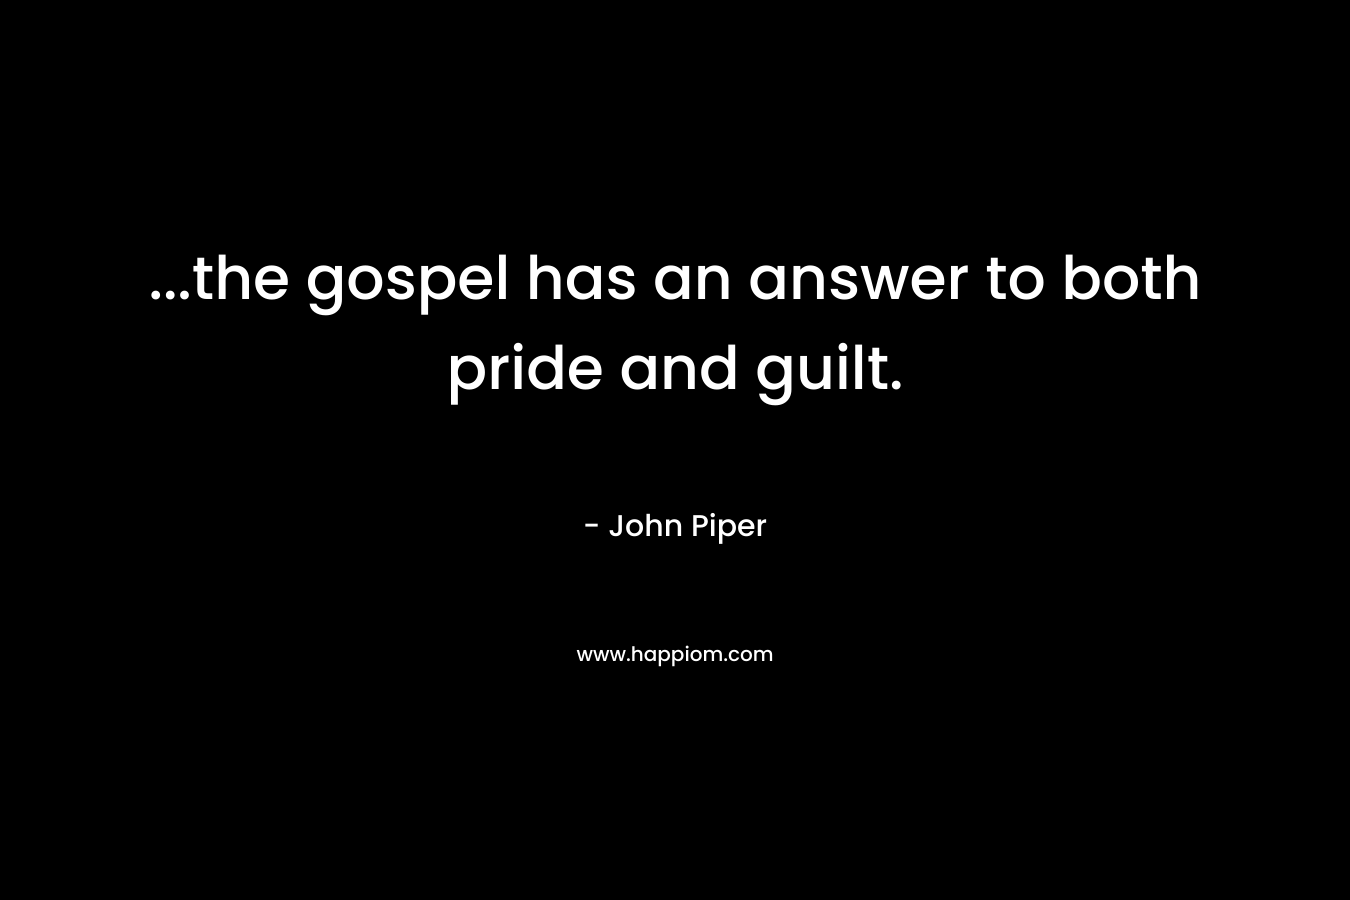 ...the gospel has an answer to both pride and guilt.